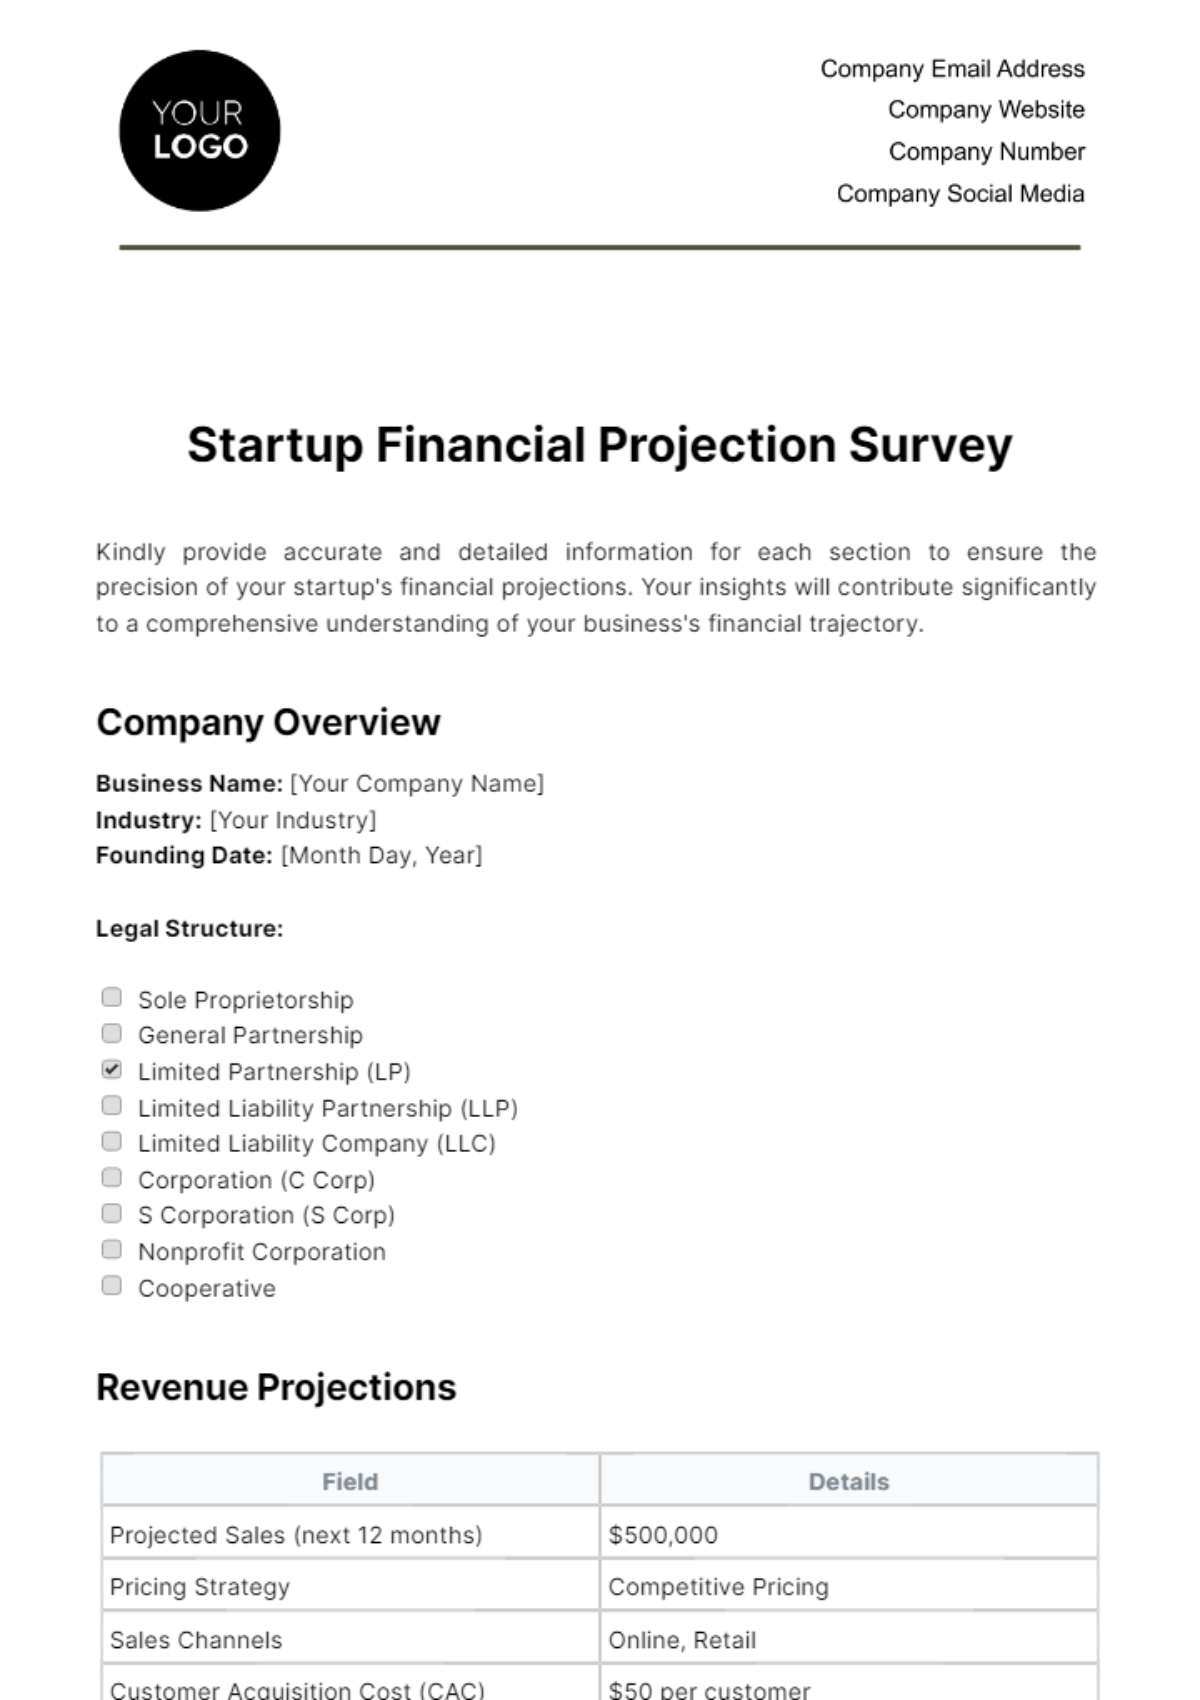 Free Startup Financial Projection Survey Template